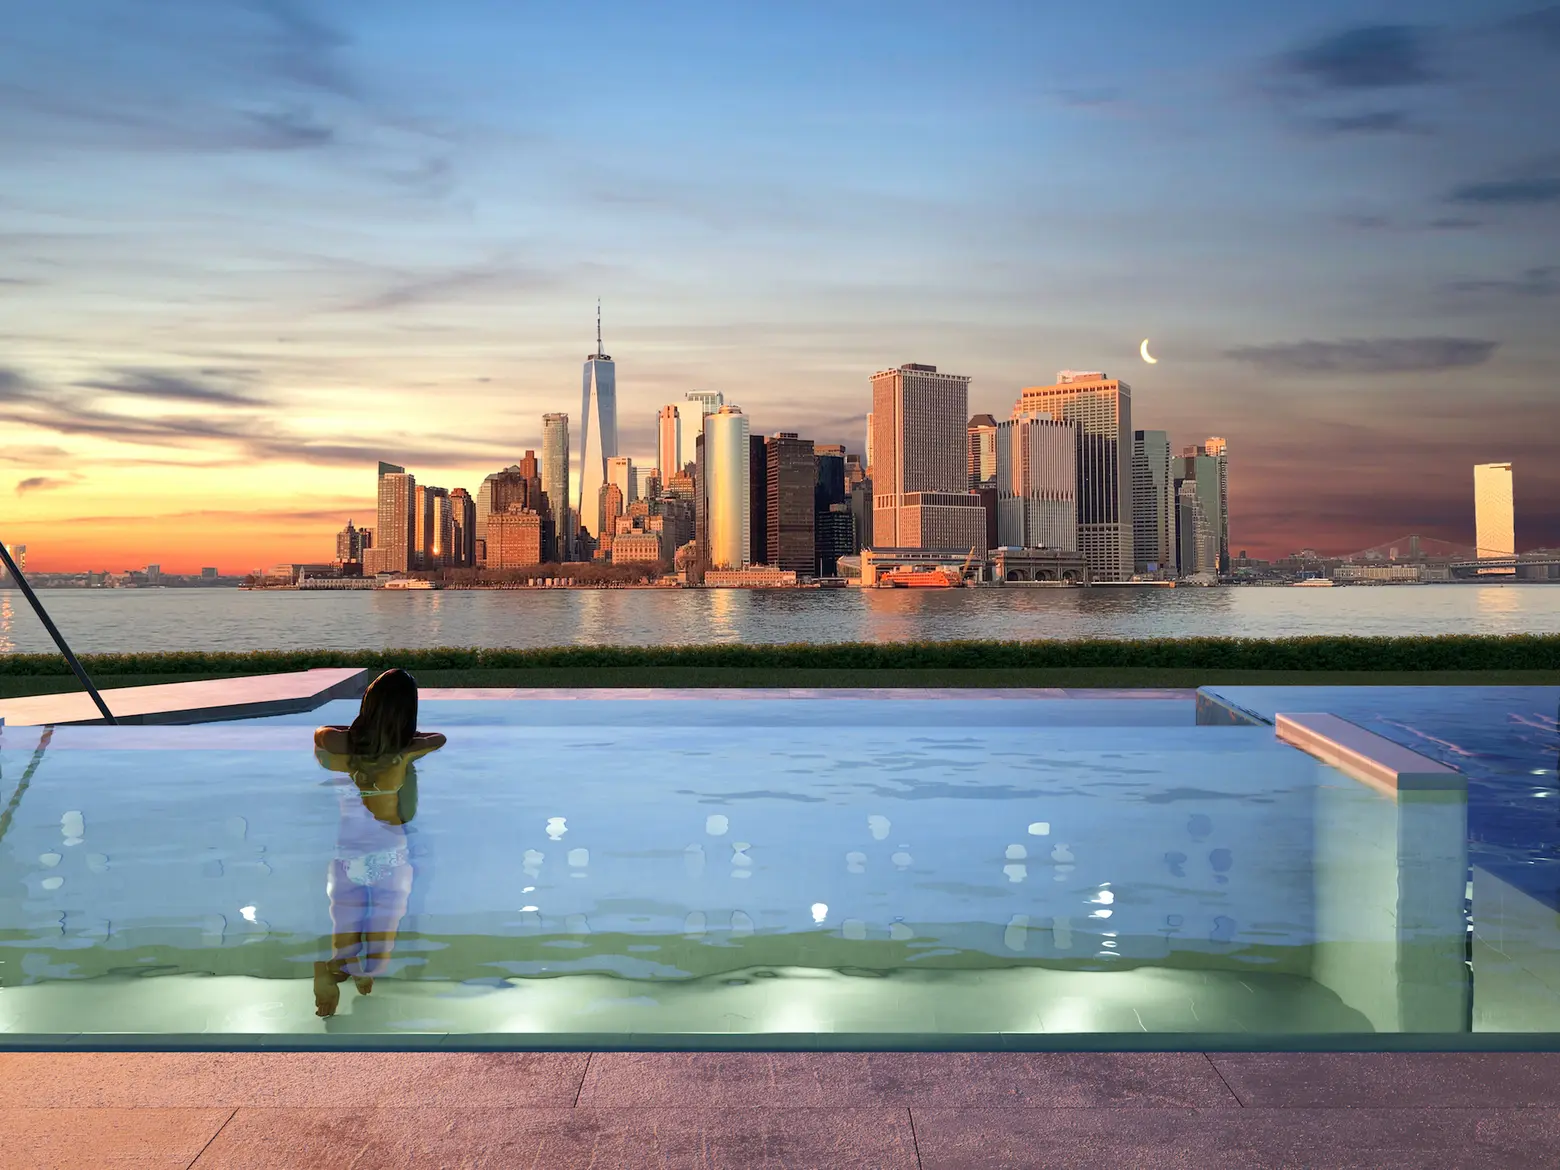 An Italian spa with outdoor thermal pools will open on Governors Island this summer